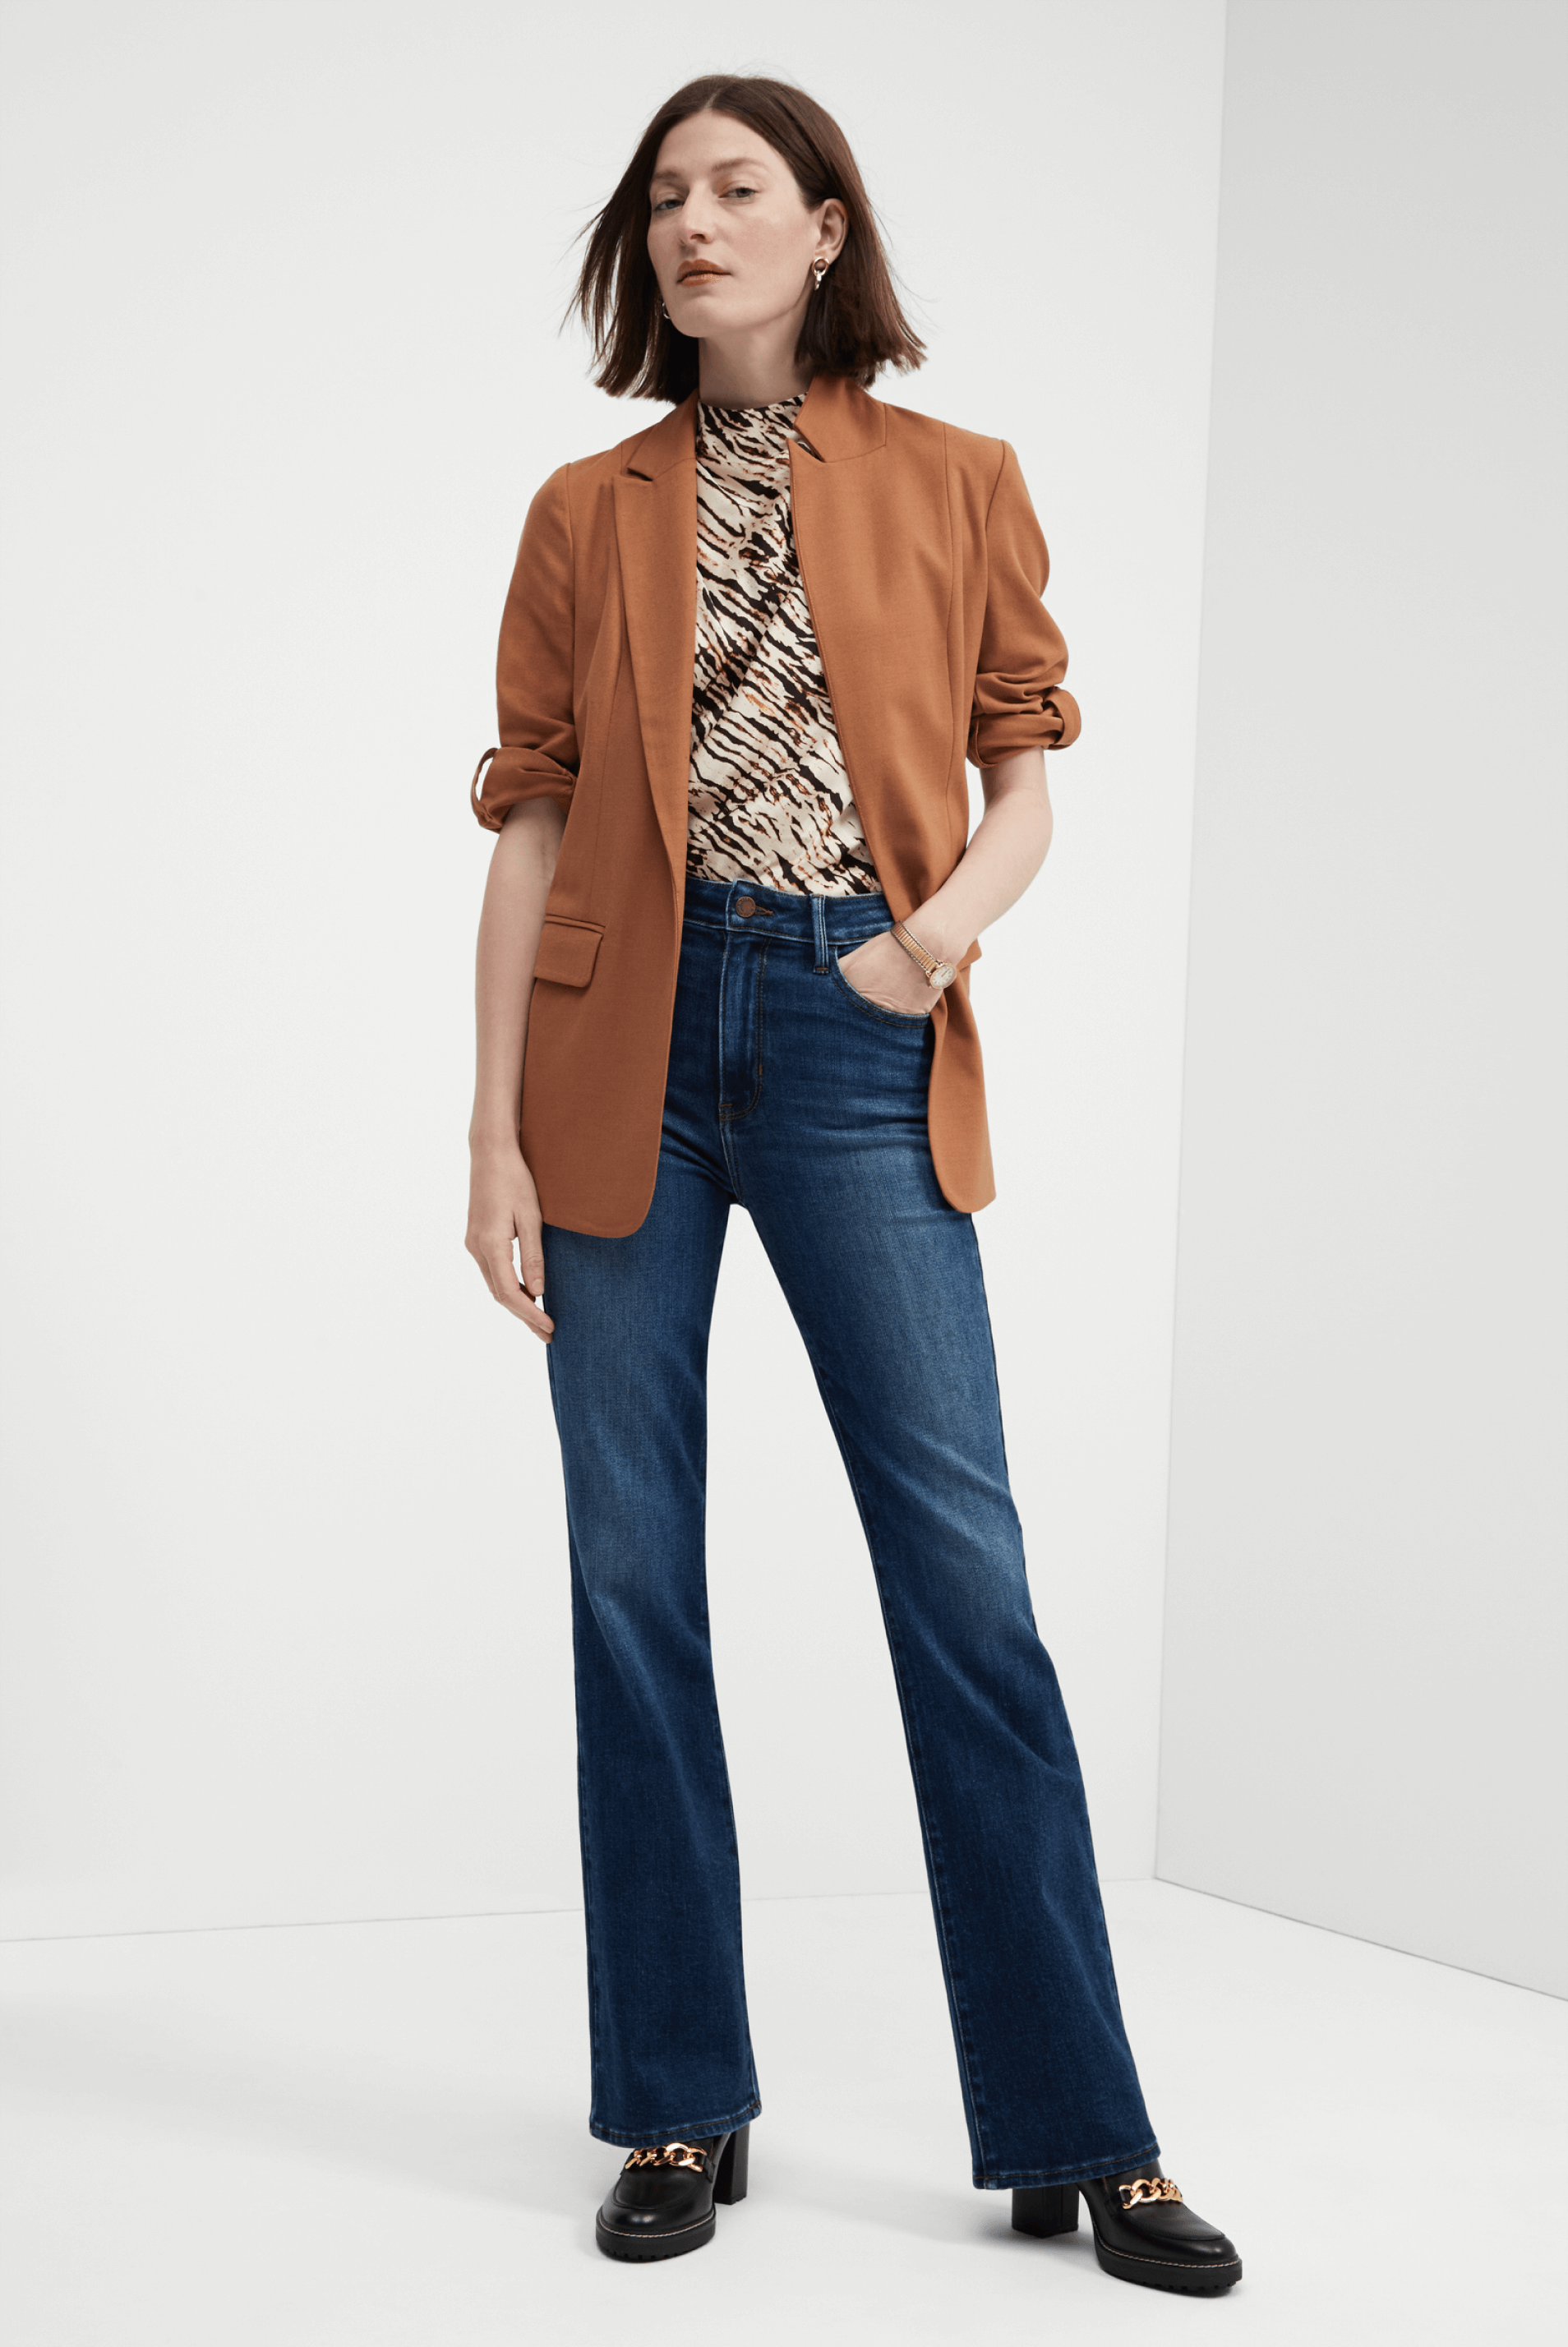 women's fall outfit with straight leg jeans